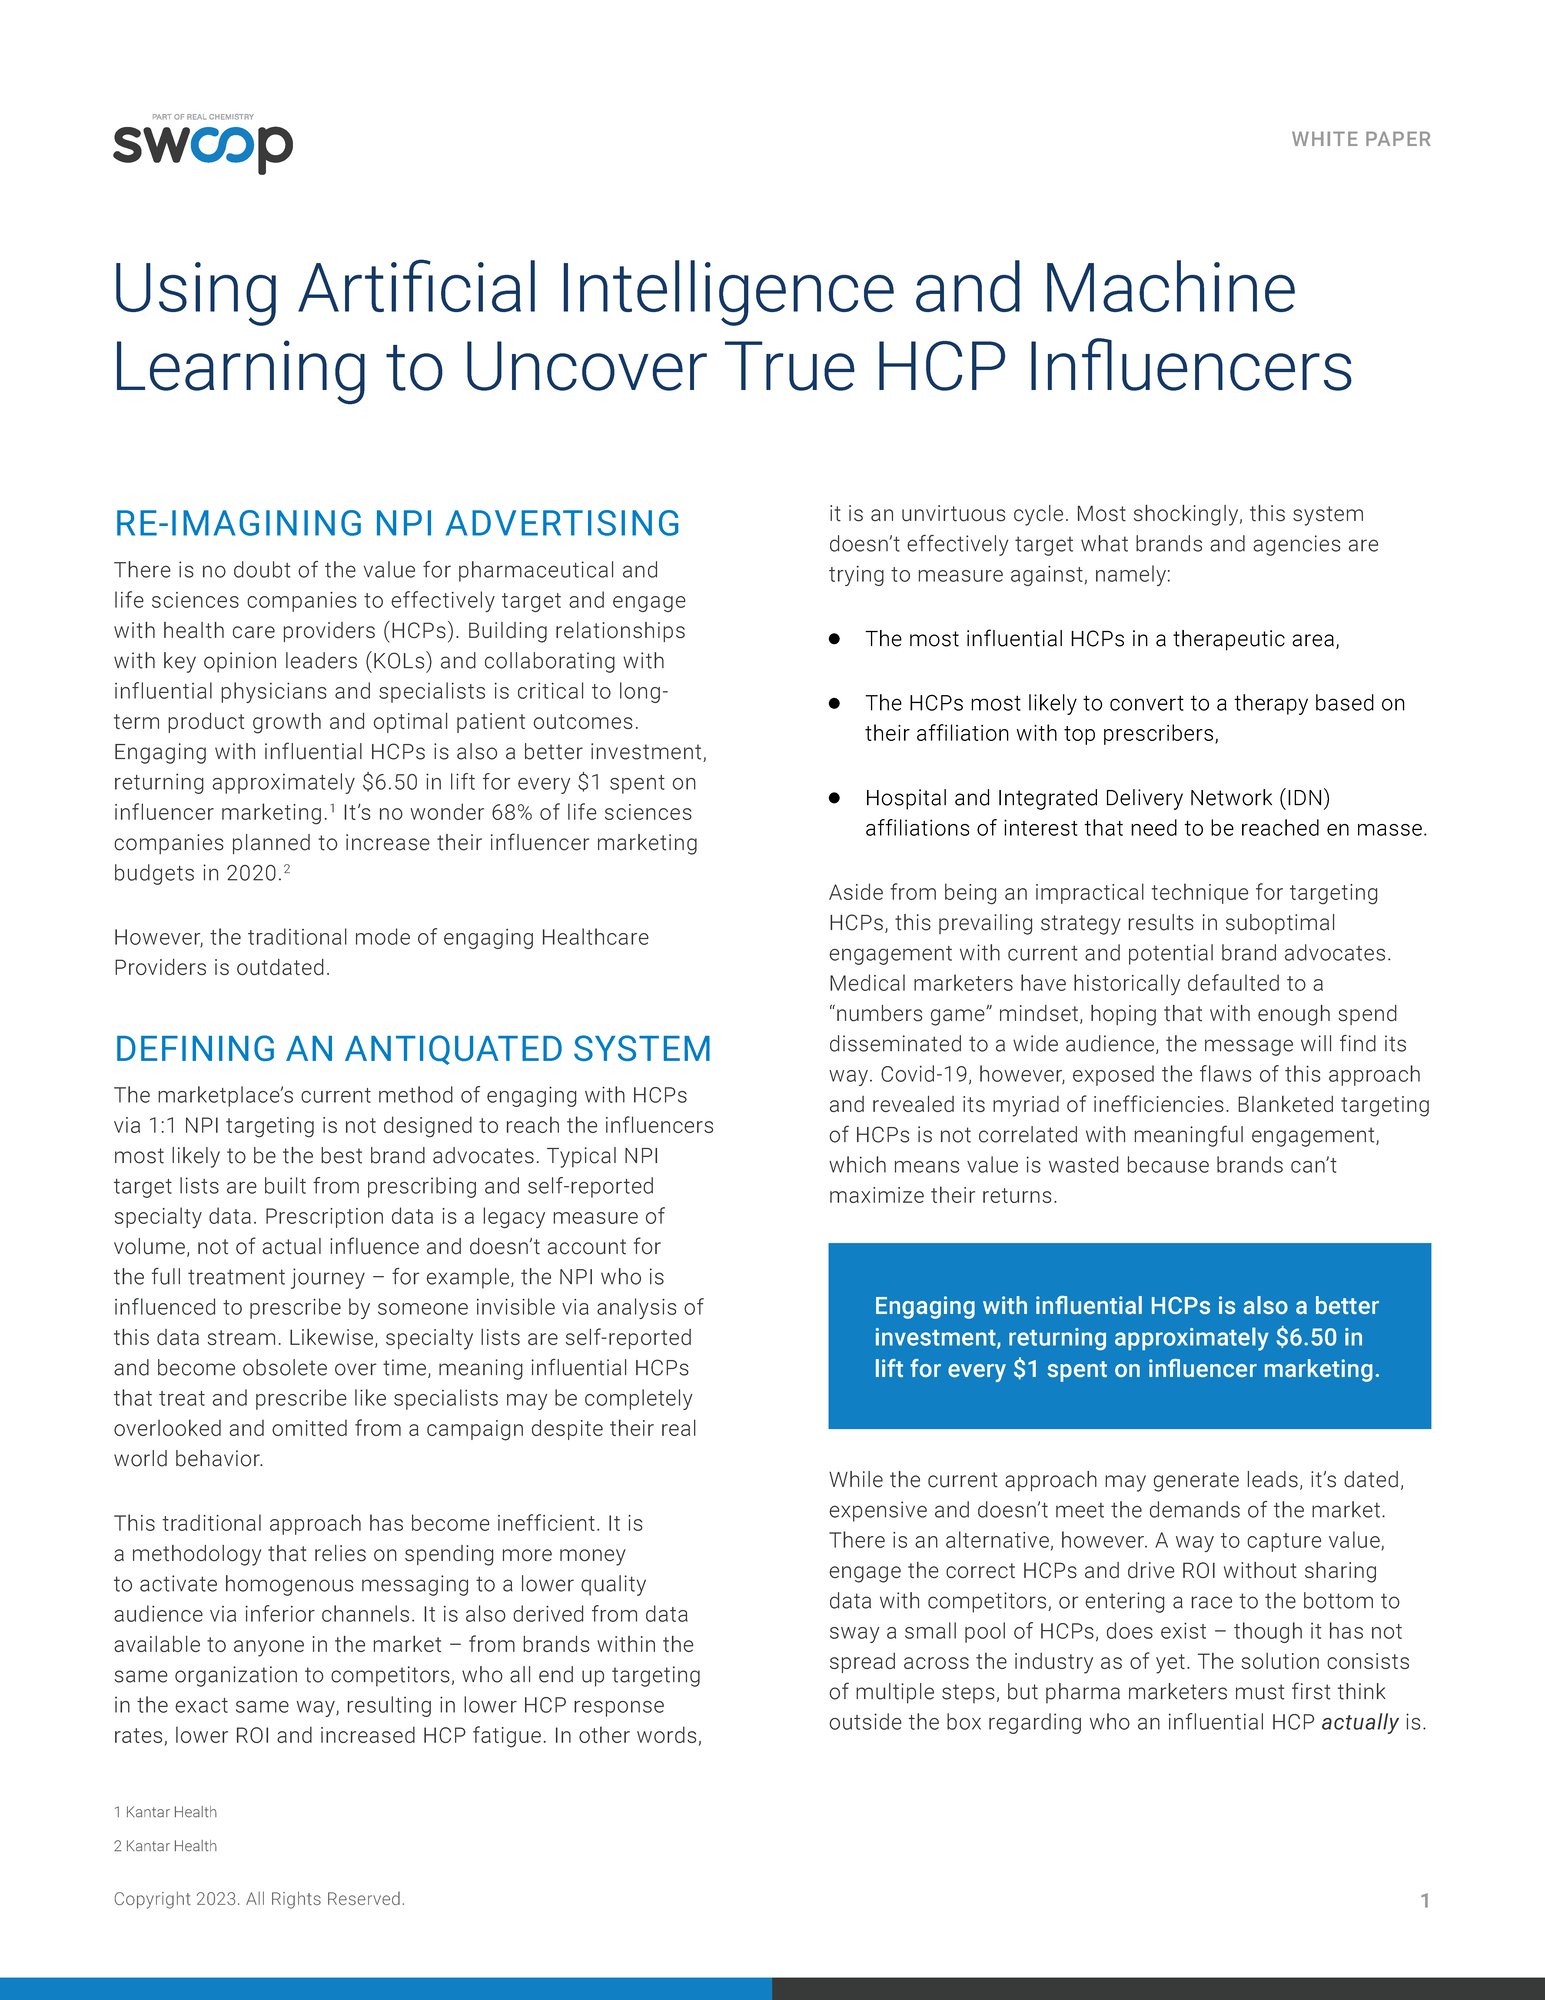 Using Artificial Intelligence_white paper_Swoop